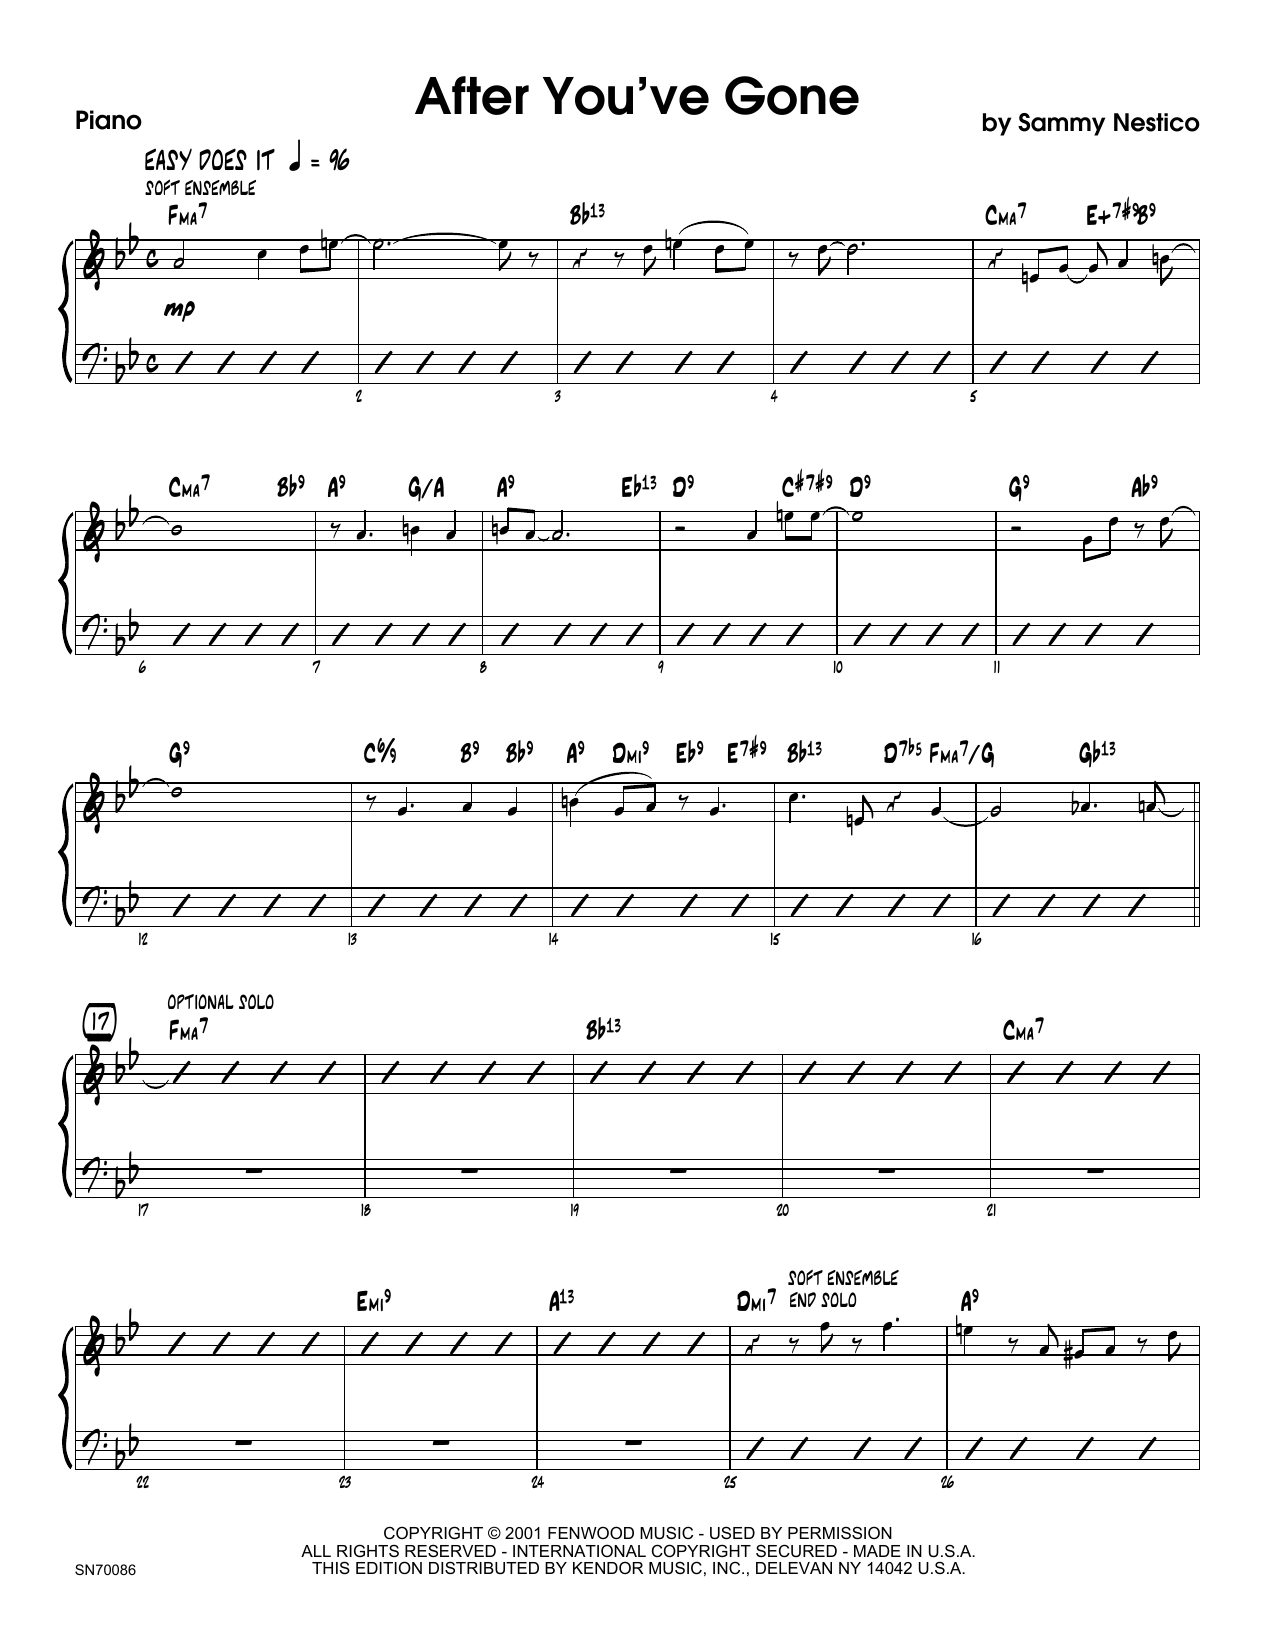 Download Sammy Nestico After You've Gone - Piano Sheet Music